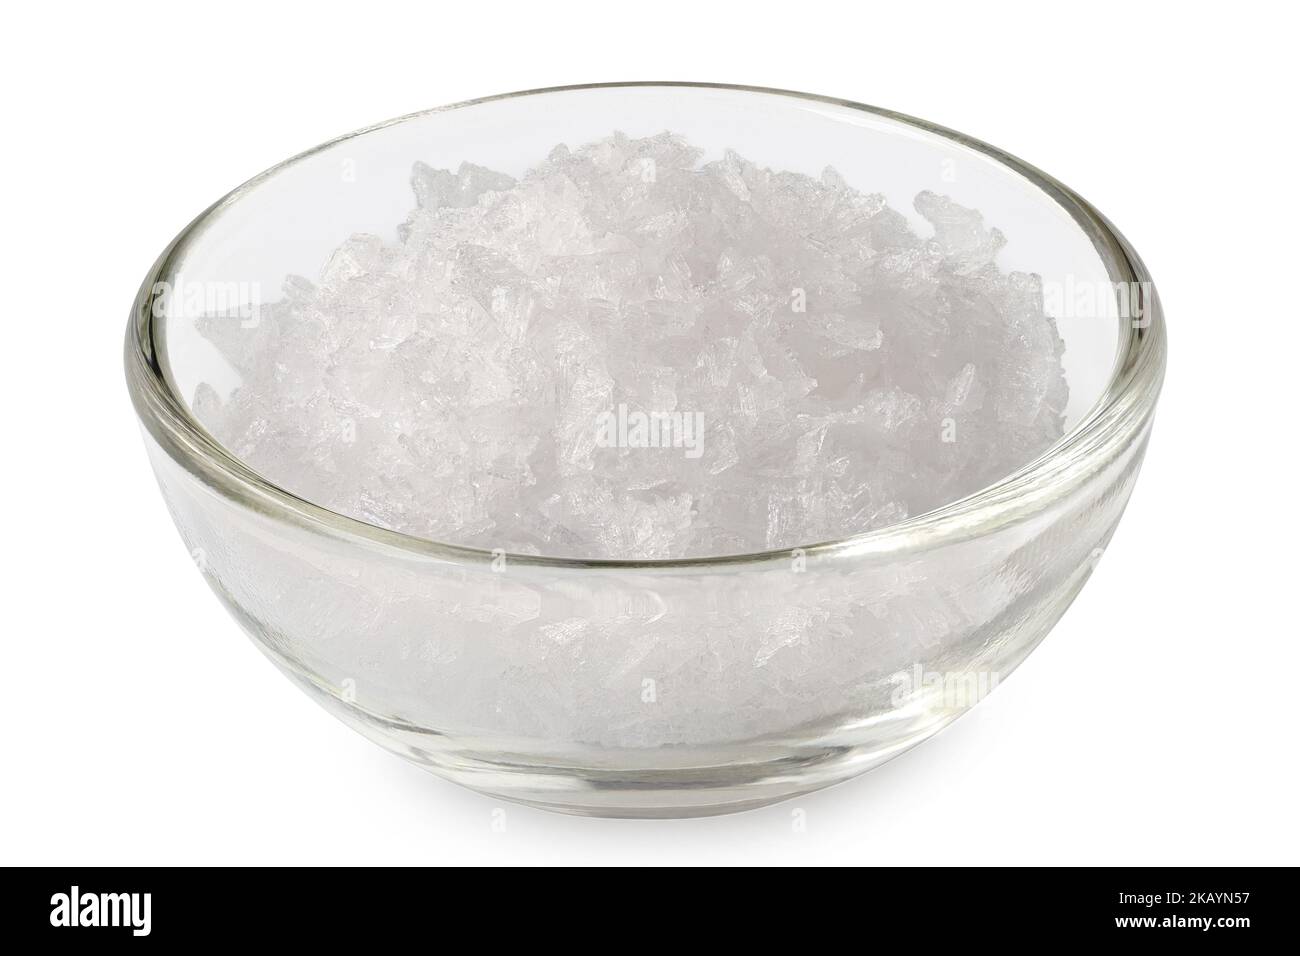 Sea salt flakes in a glass bowl isolated on white. Stock Photo